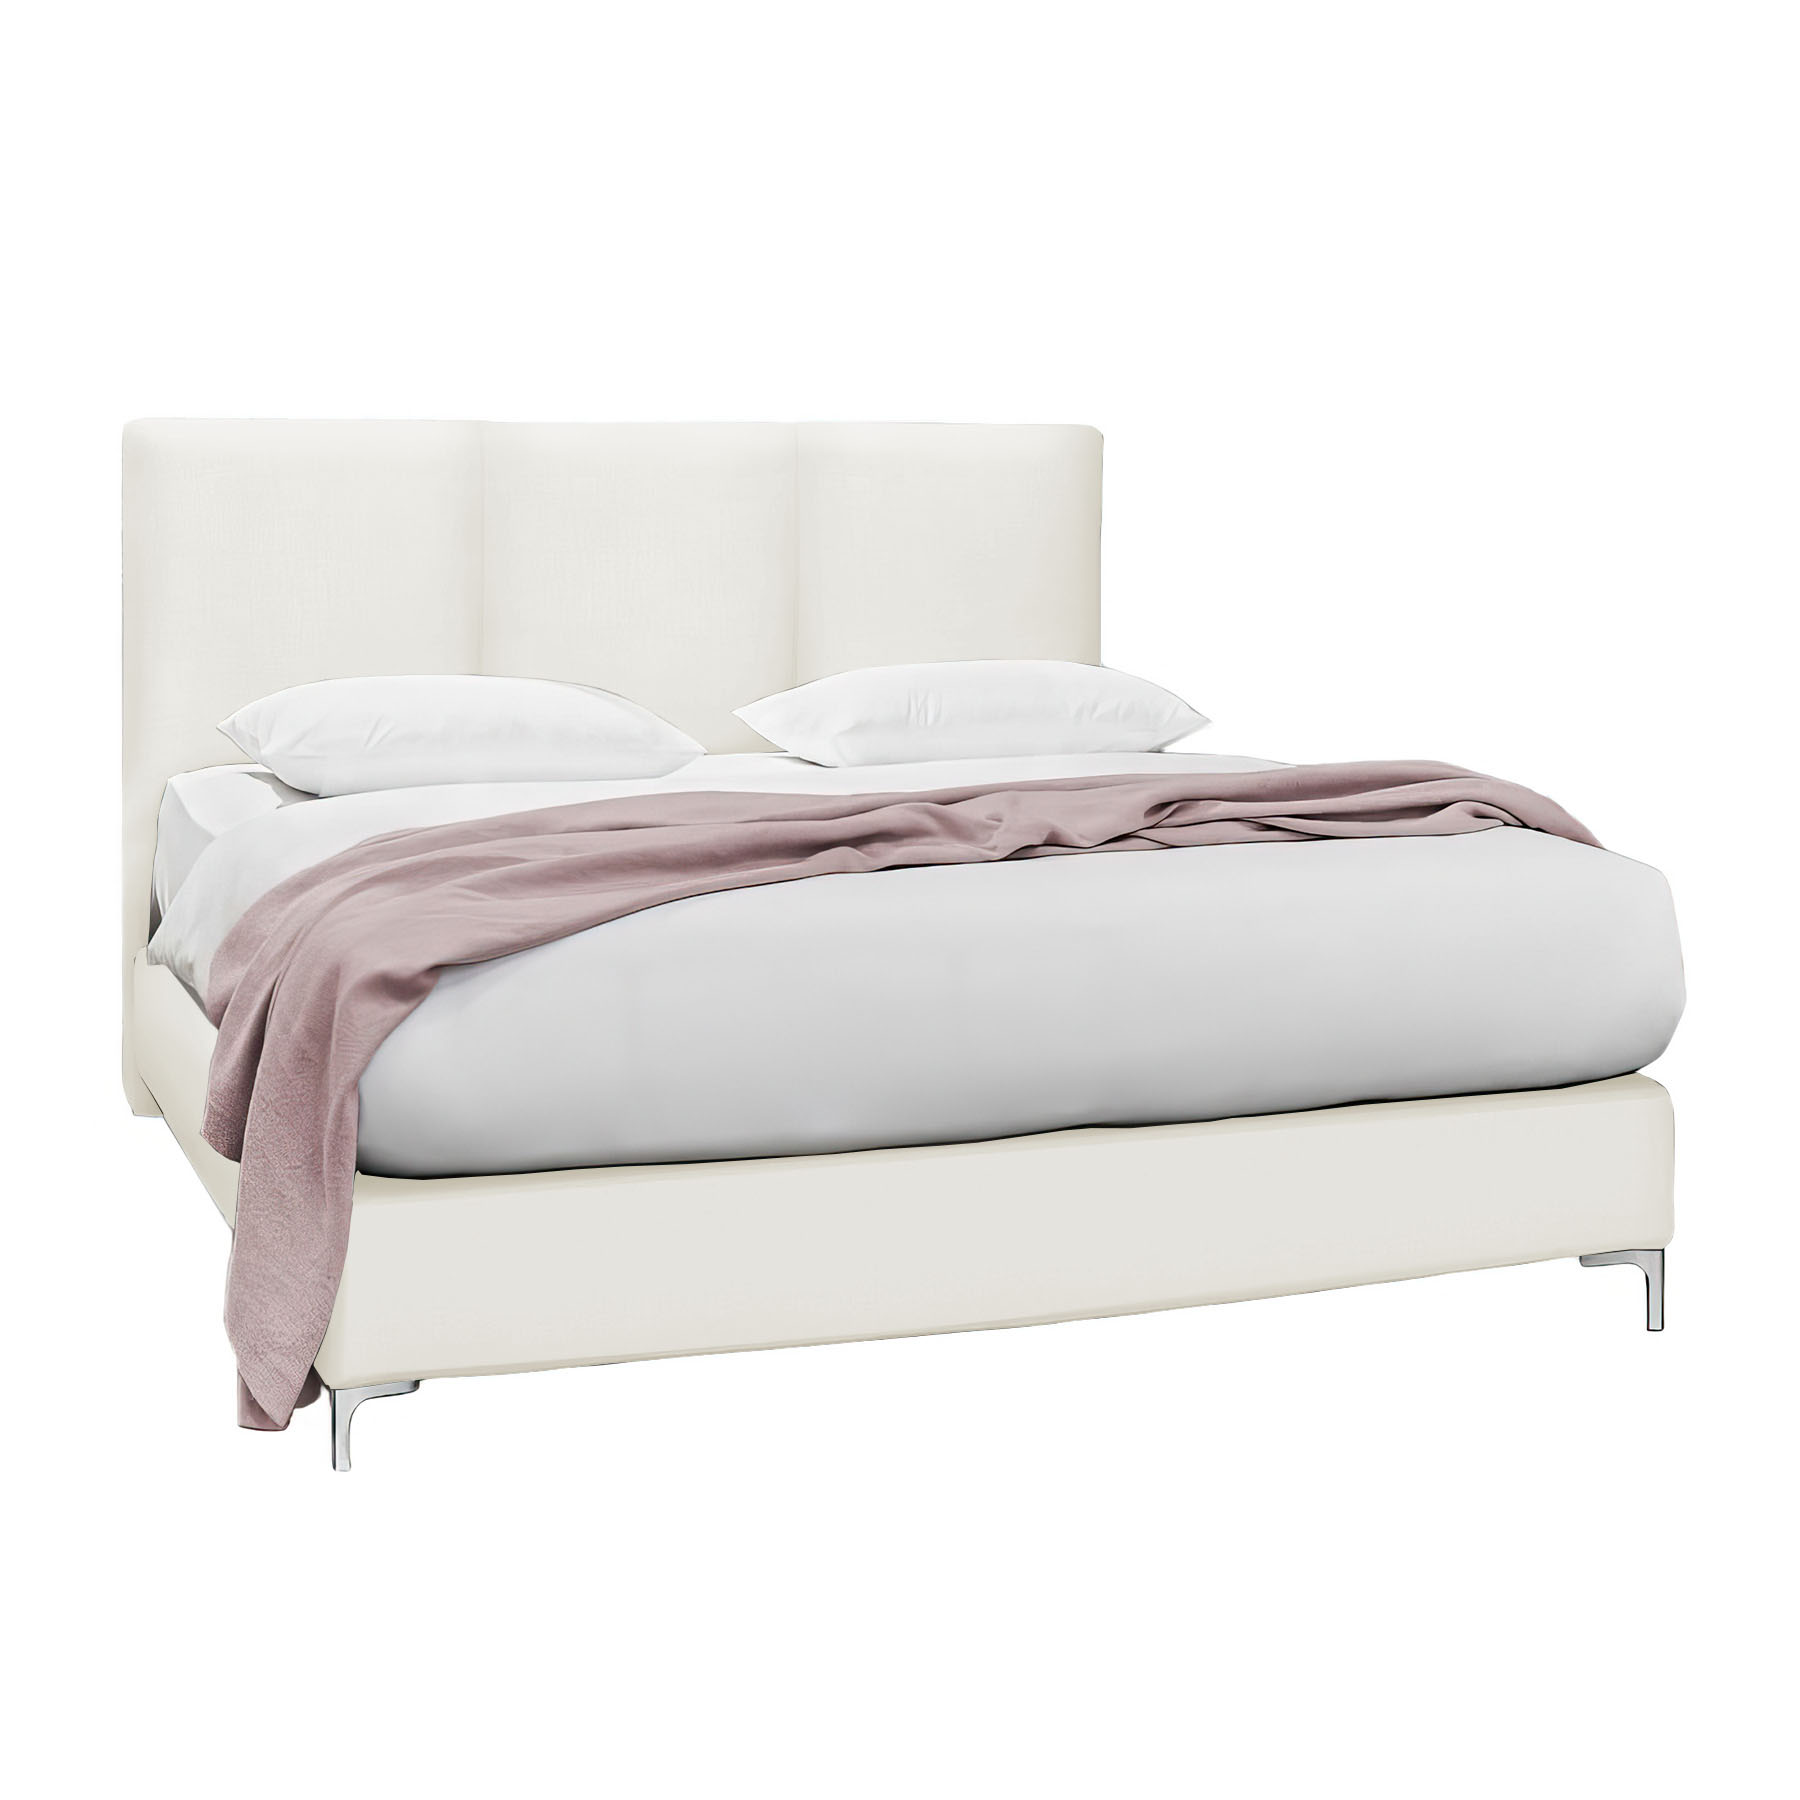 Boxspringbett Kate Select 200/210cm in Hot Madison Wollweiß